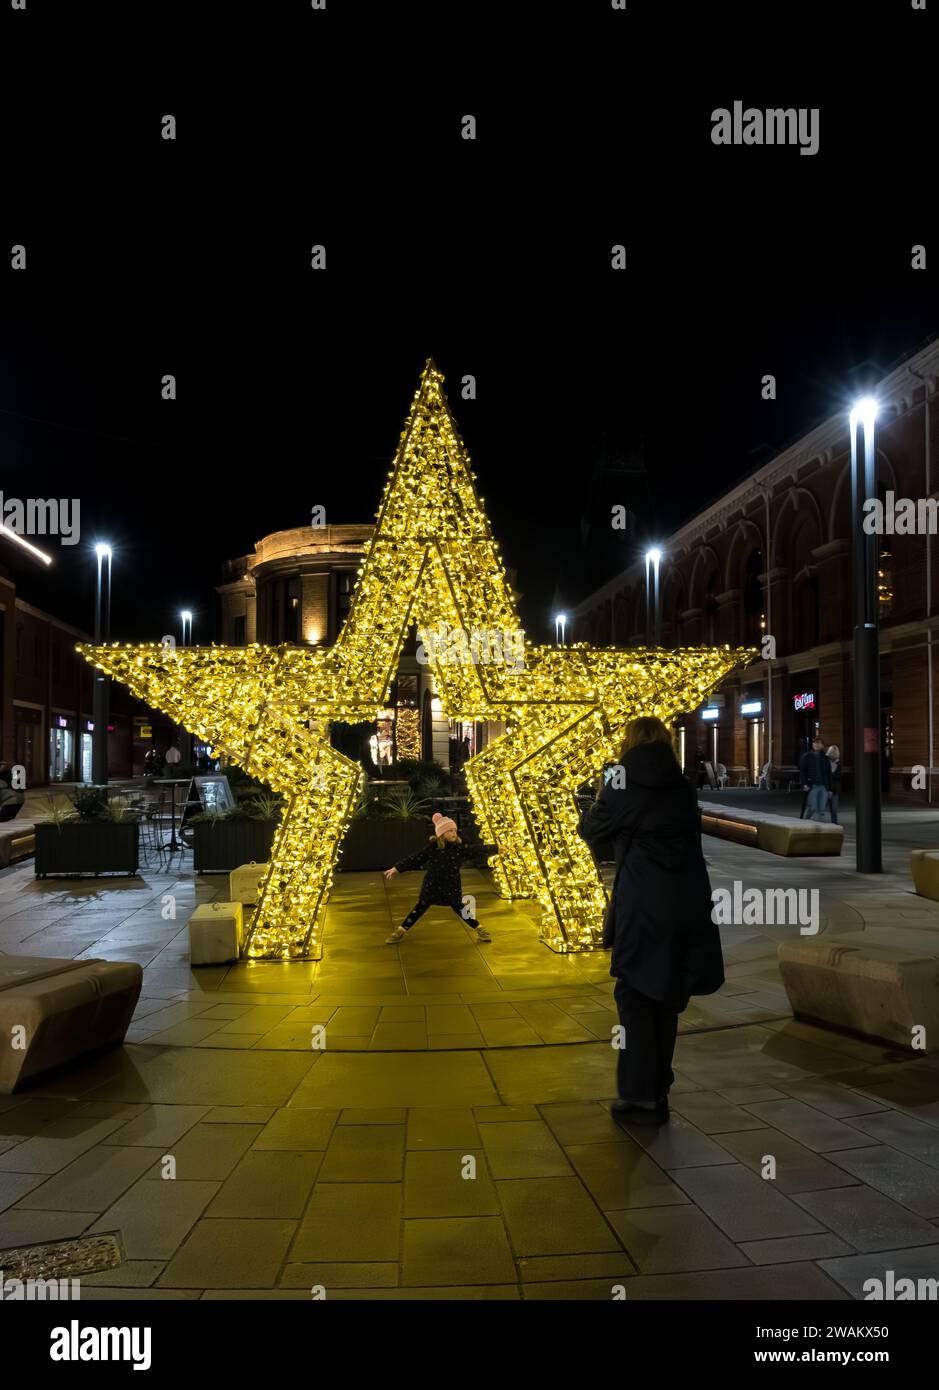 woman taking photo on mobile phone of young girl posing under gold star, Cornhill, Lincoln City, Lincolnshire, England, UK Stock Photo